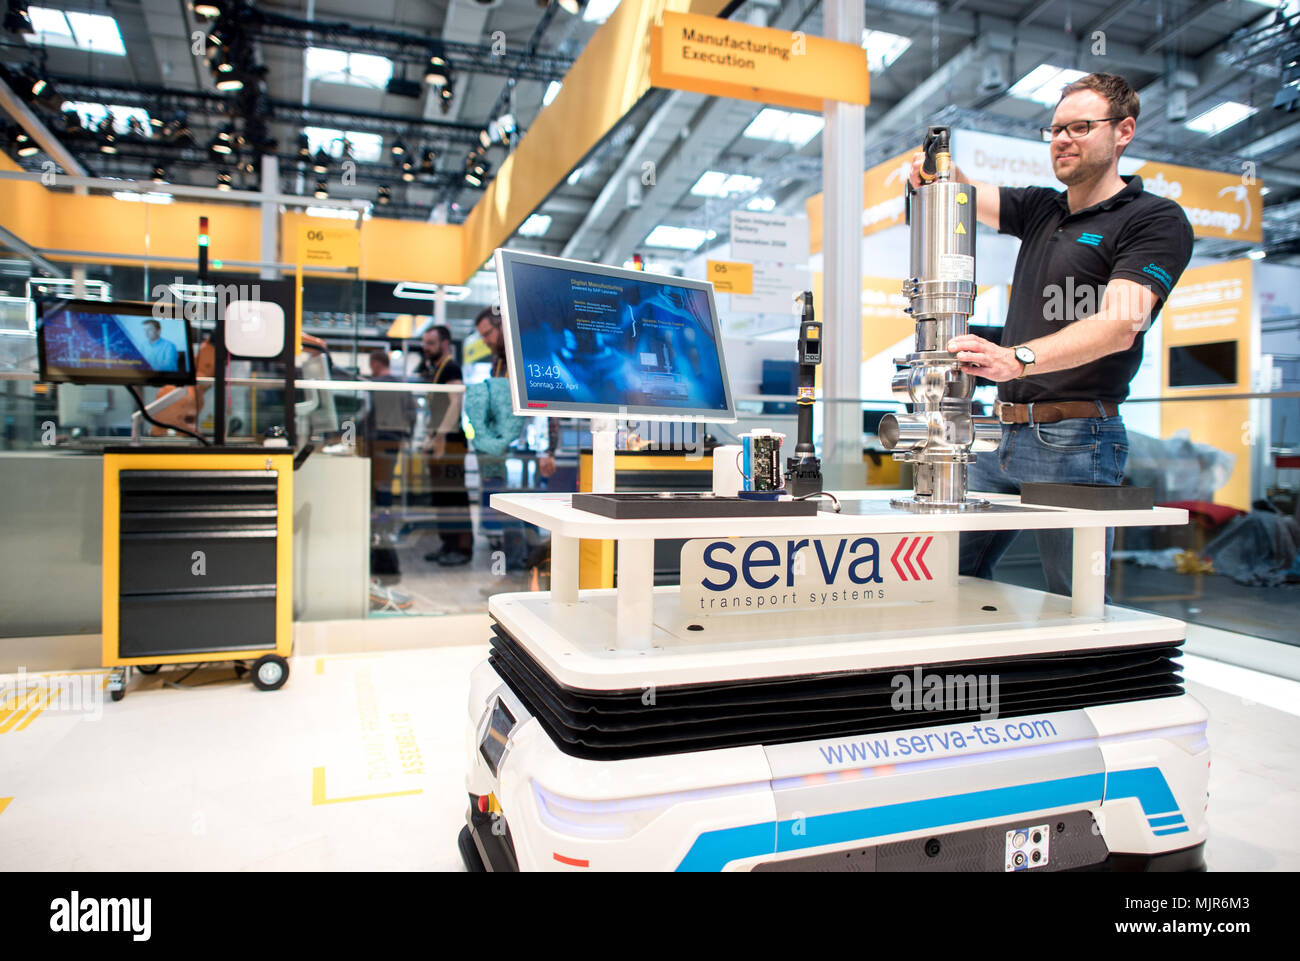 22 April 2018, Germany, Hanover: Michael Kierakowicz works on a driverless transport system at a SAP stand at the Hanover Fair. SAP presents new developments in the innovative products sector. Photo: Hauke-Christian Dittrich/dpa Stock Photo